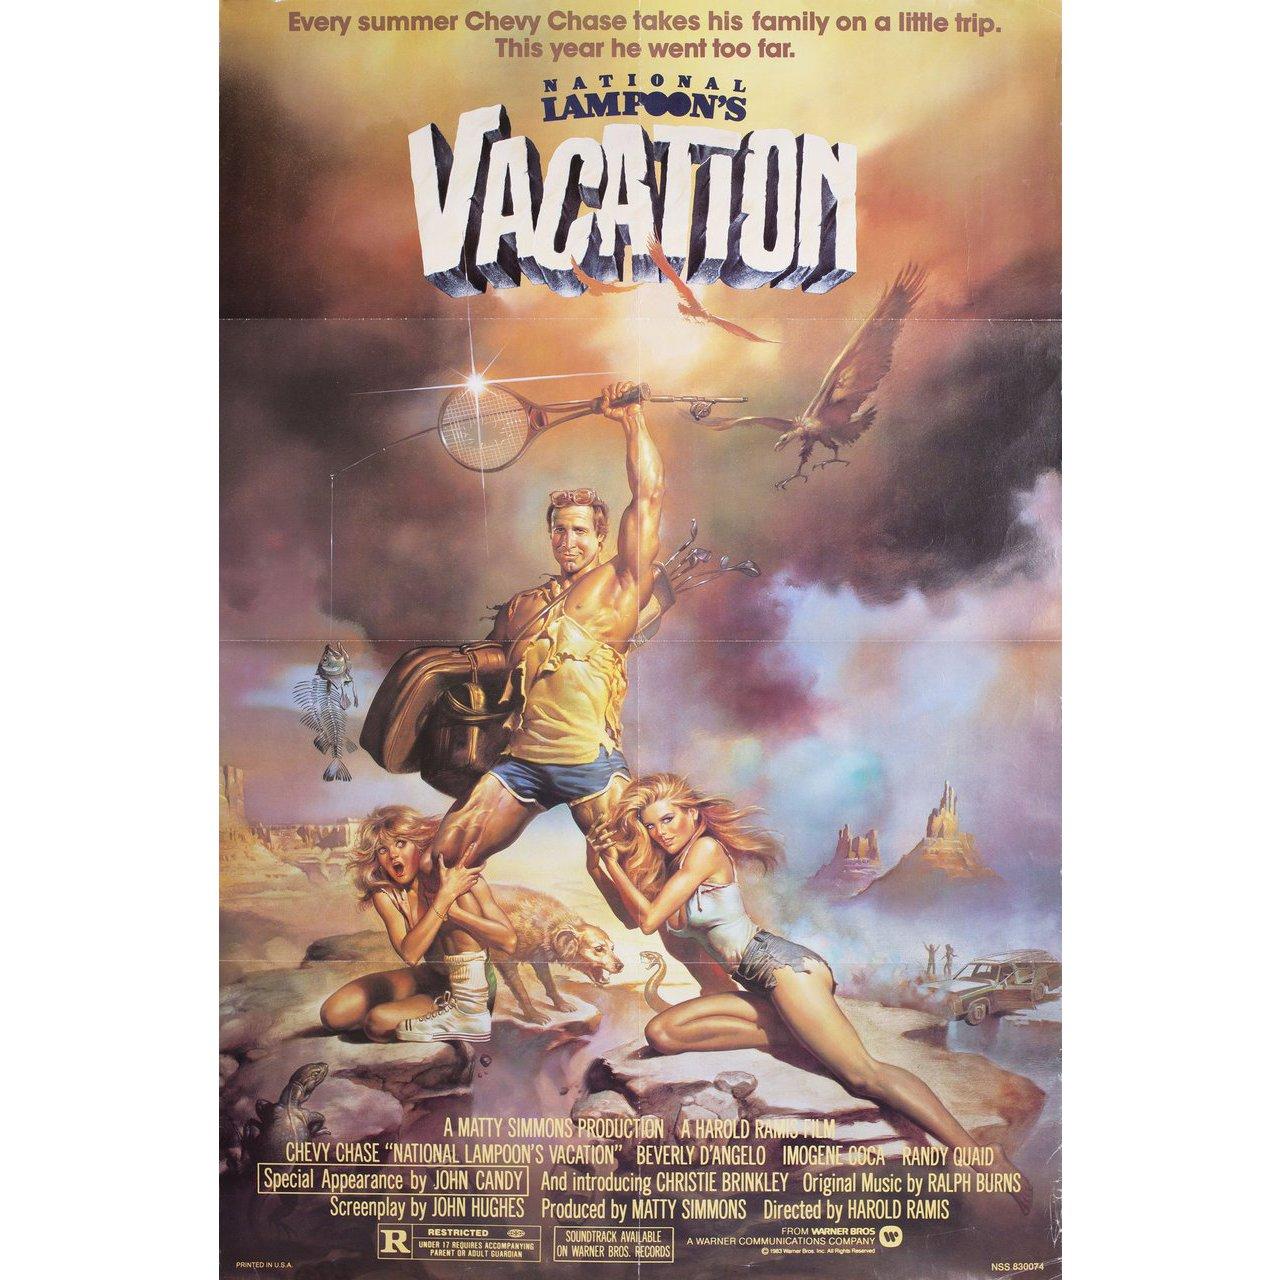 Original 1983 U.S. one sheet poster by Boris Vallejo for the film National Lampoon's Vacation directed by Harold Ramis with Chevy Chase / Beverly D'Angelo / Imogene Coca / Randy Quaid. Very good-fine condition, folded with edge wear. Many original